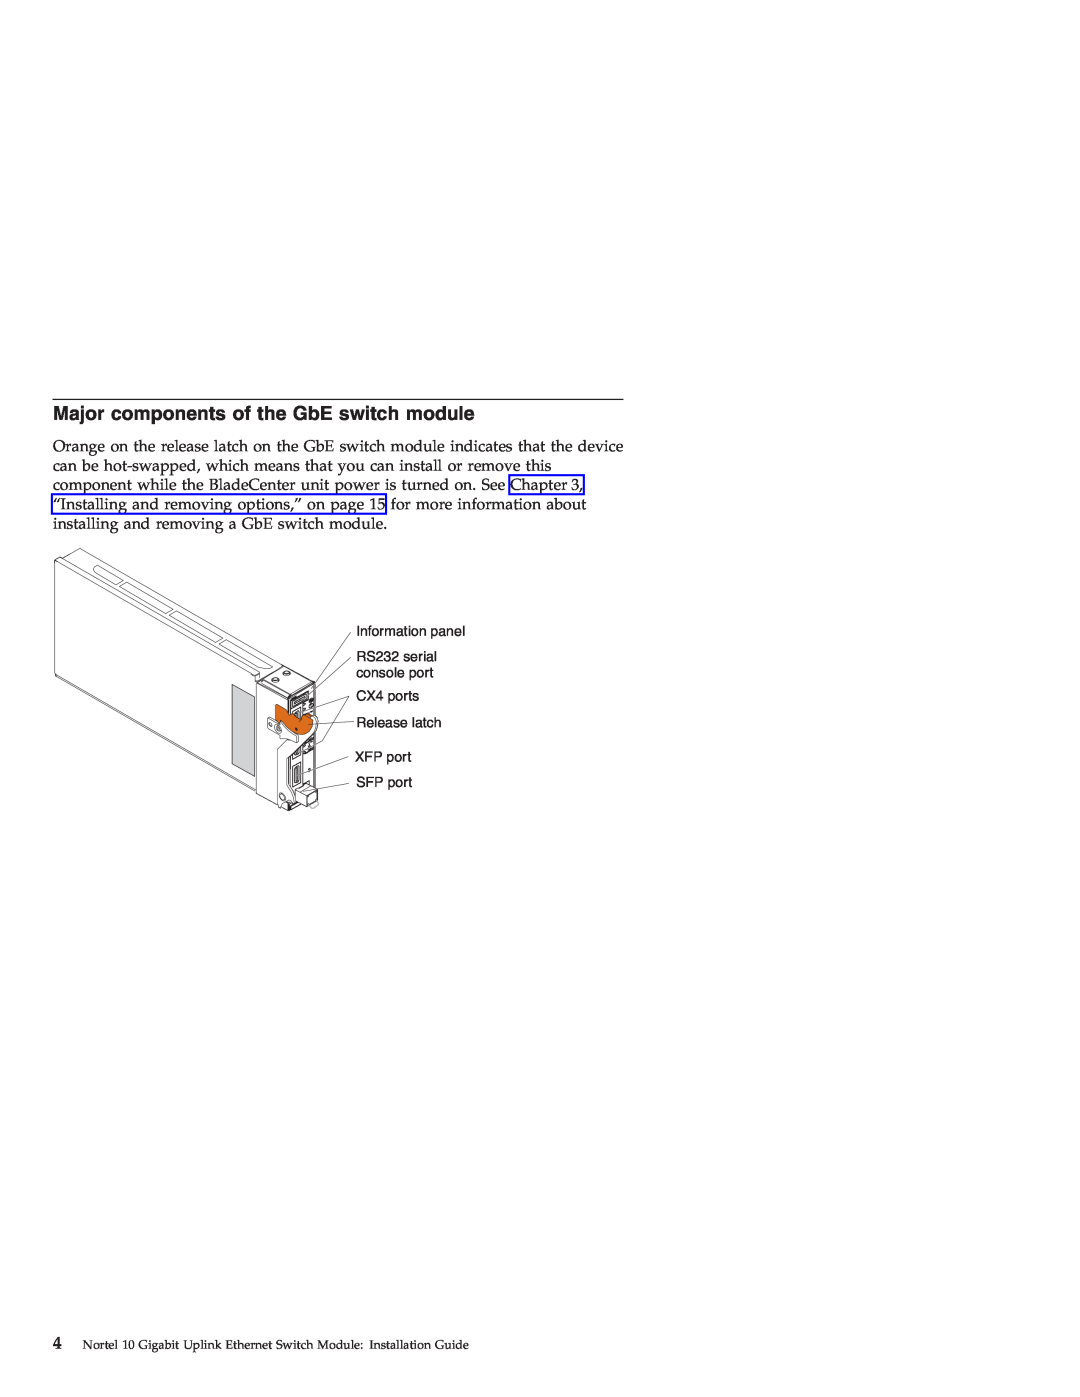 IBM Nortel 10 manual Major components of the GbE switch module, 4 TX/RX XFP port, SFP port 